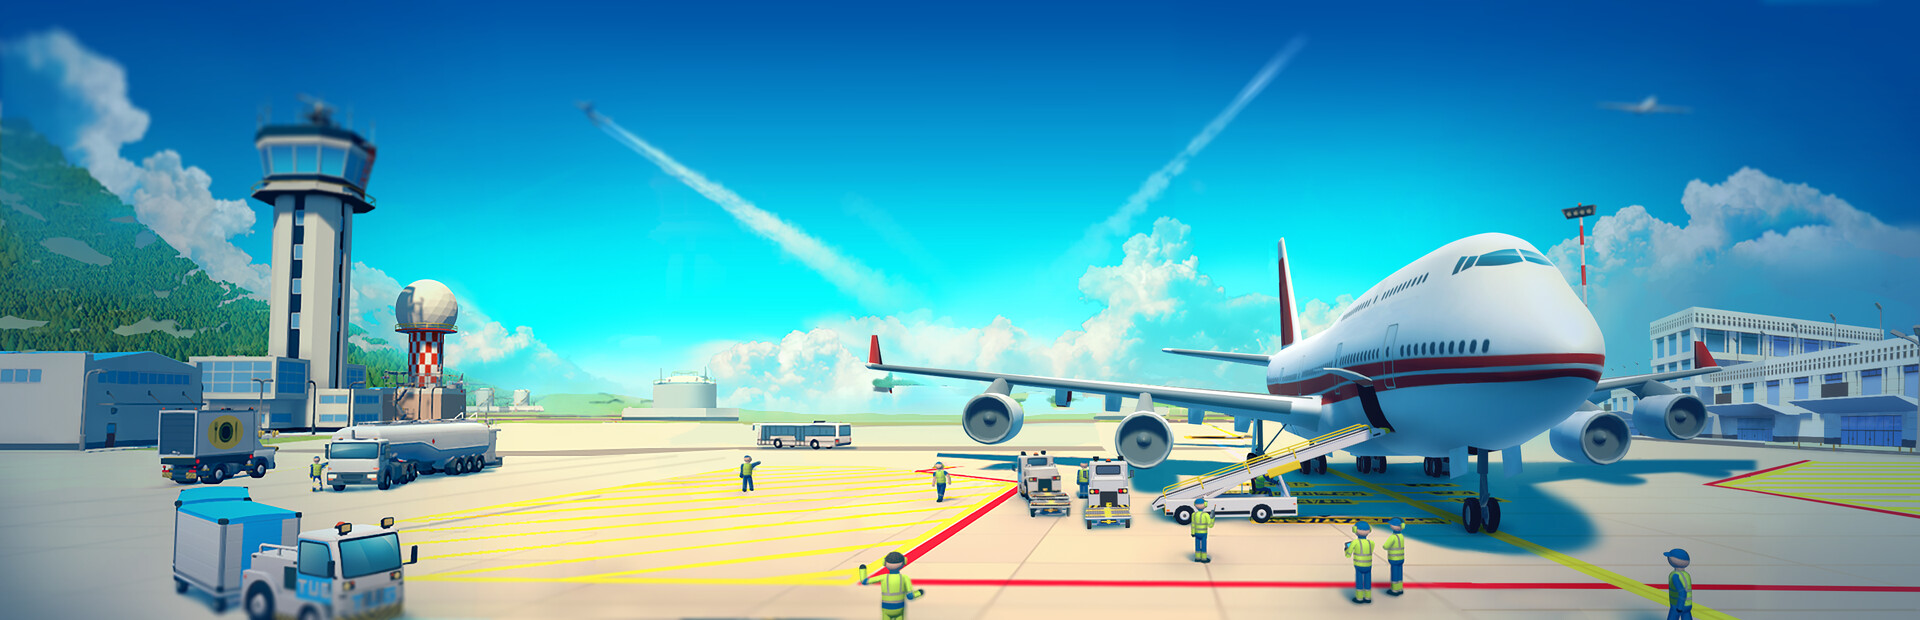 Sky Haven Tycoon - Airport Simulator cover image